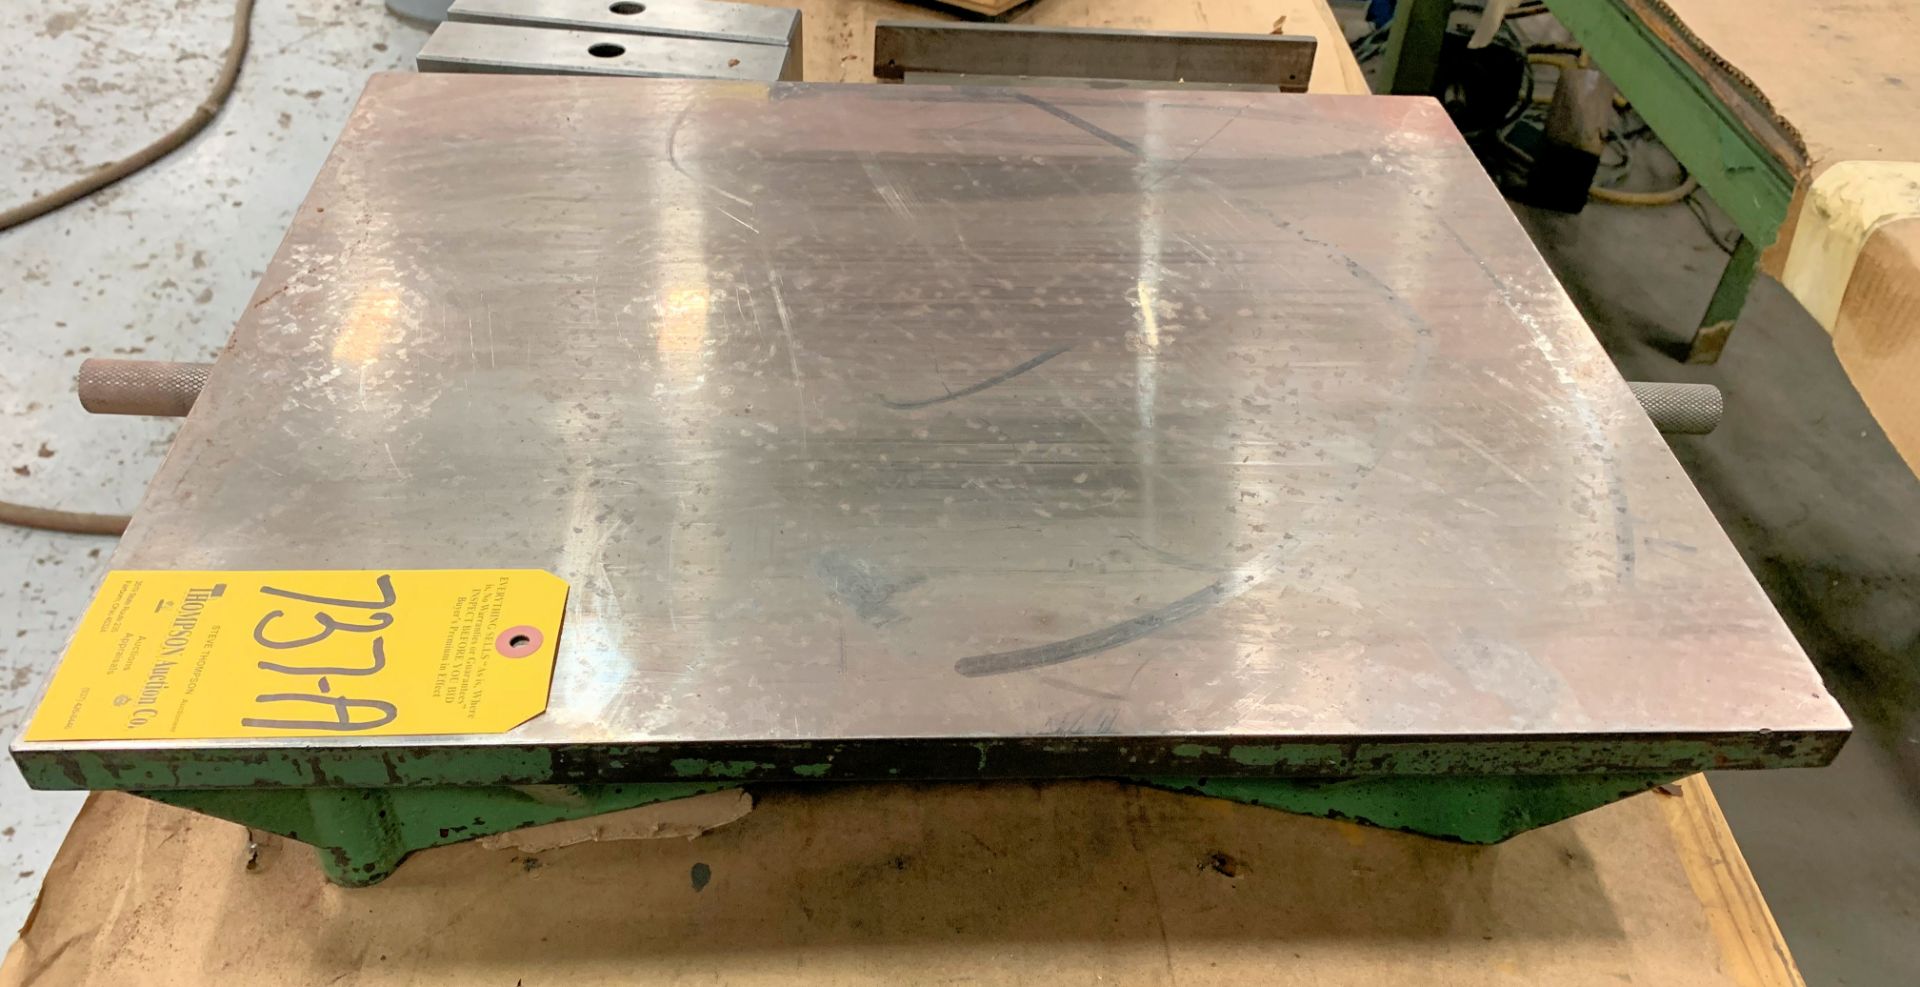 18" x 22" Cast Iron Surface Plate, (Contents Not Included) - Image 2 of 2